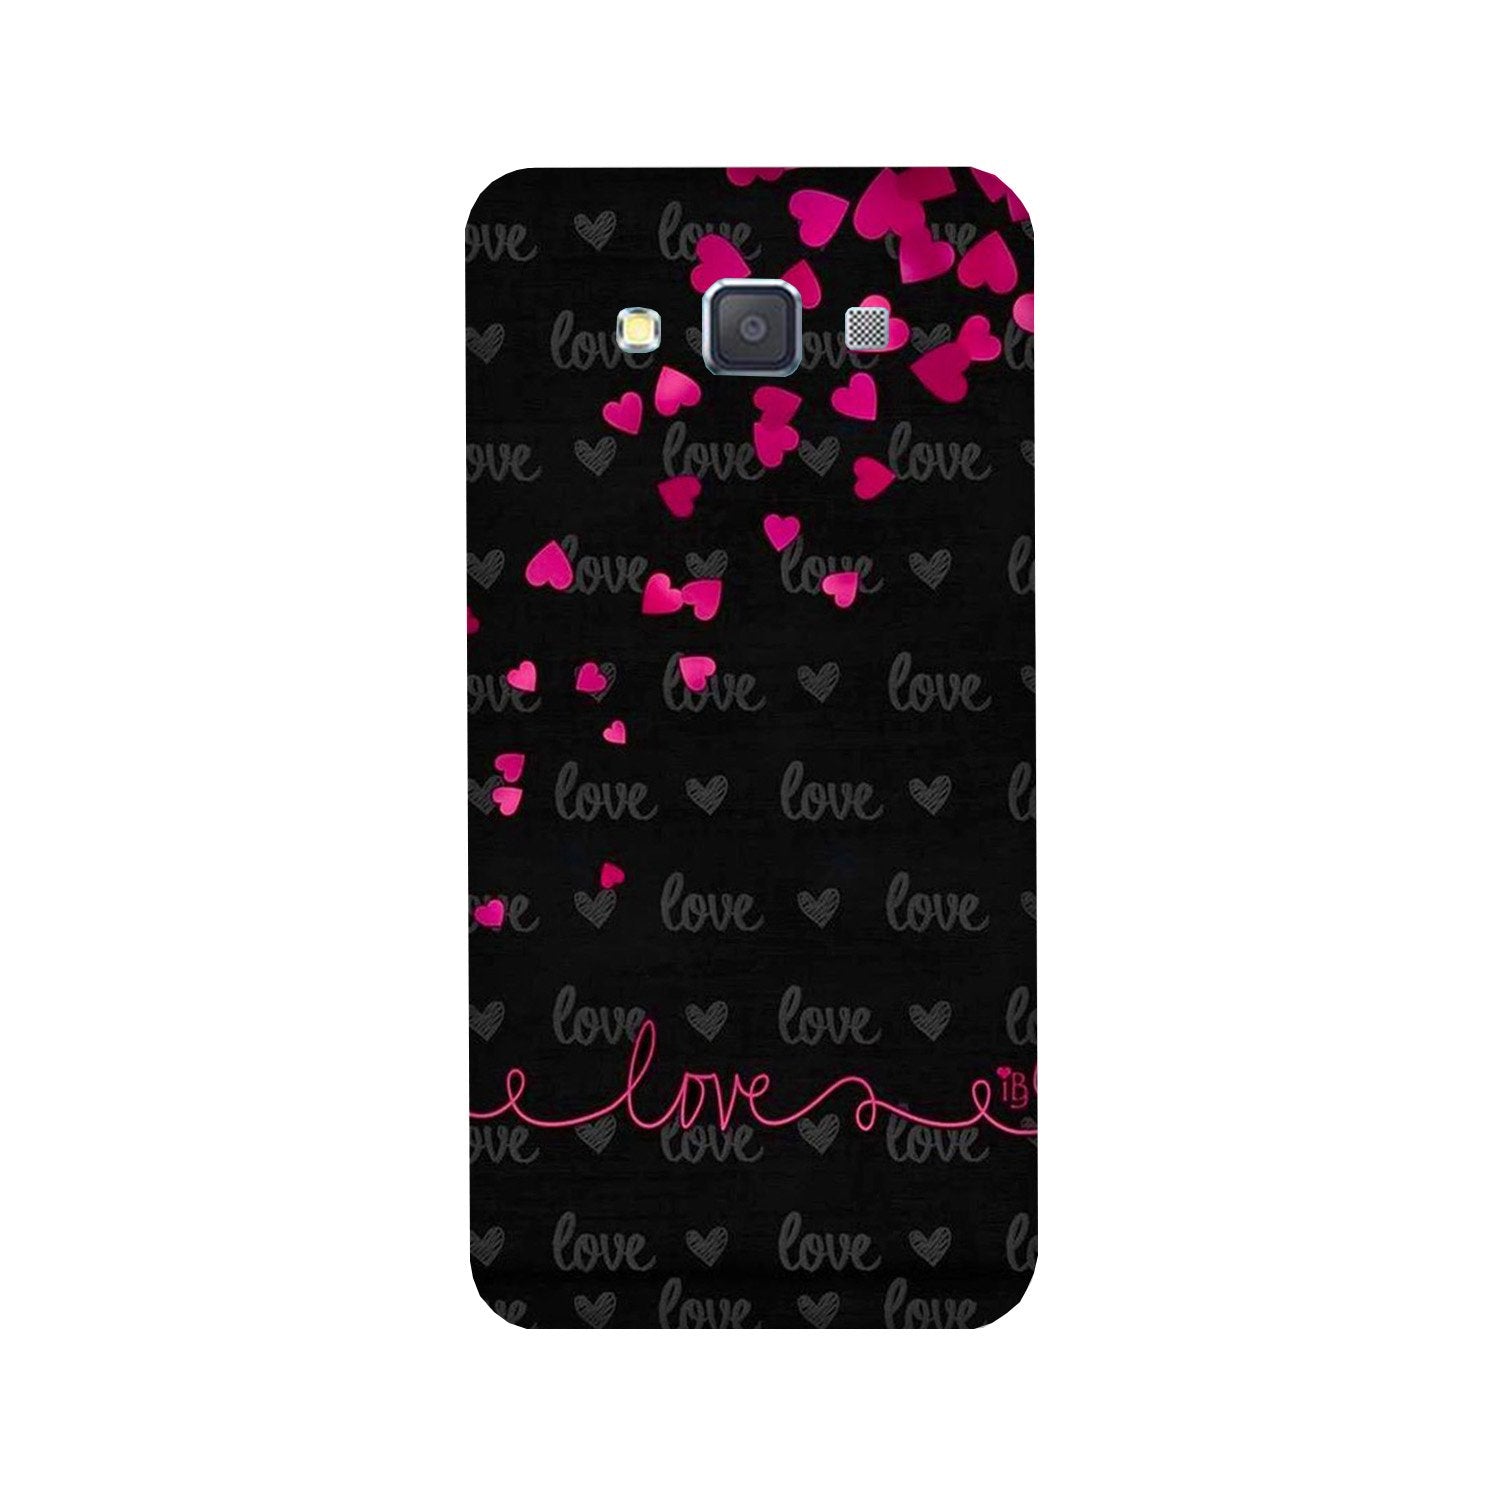 Love in Air Case for Galaxy J7 (2016)